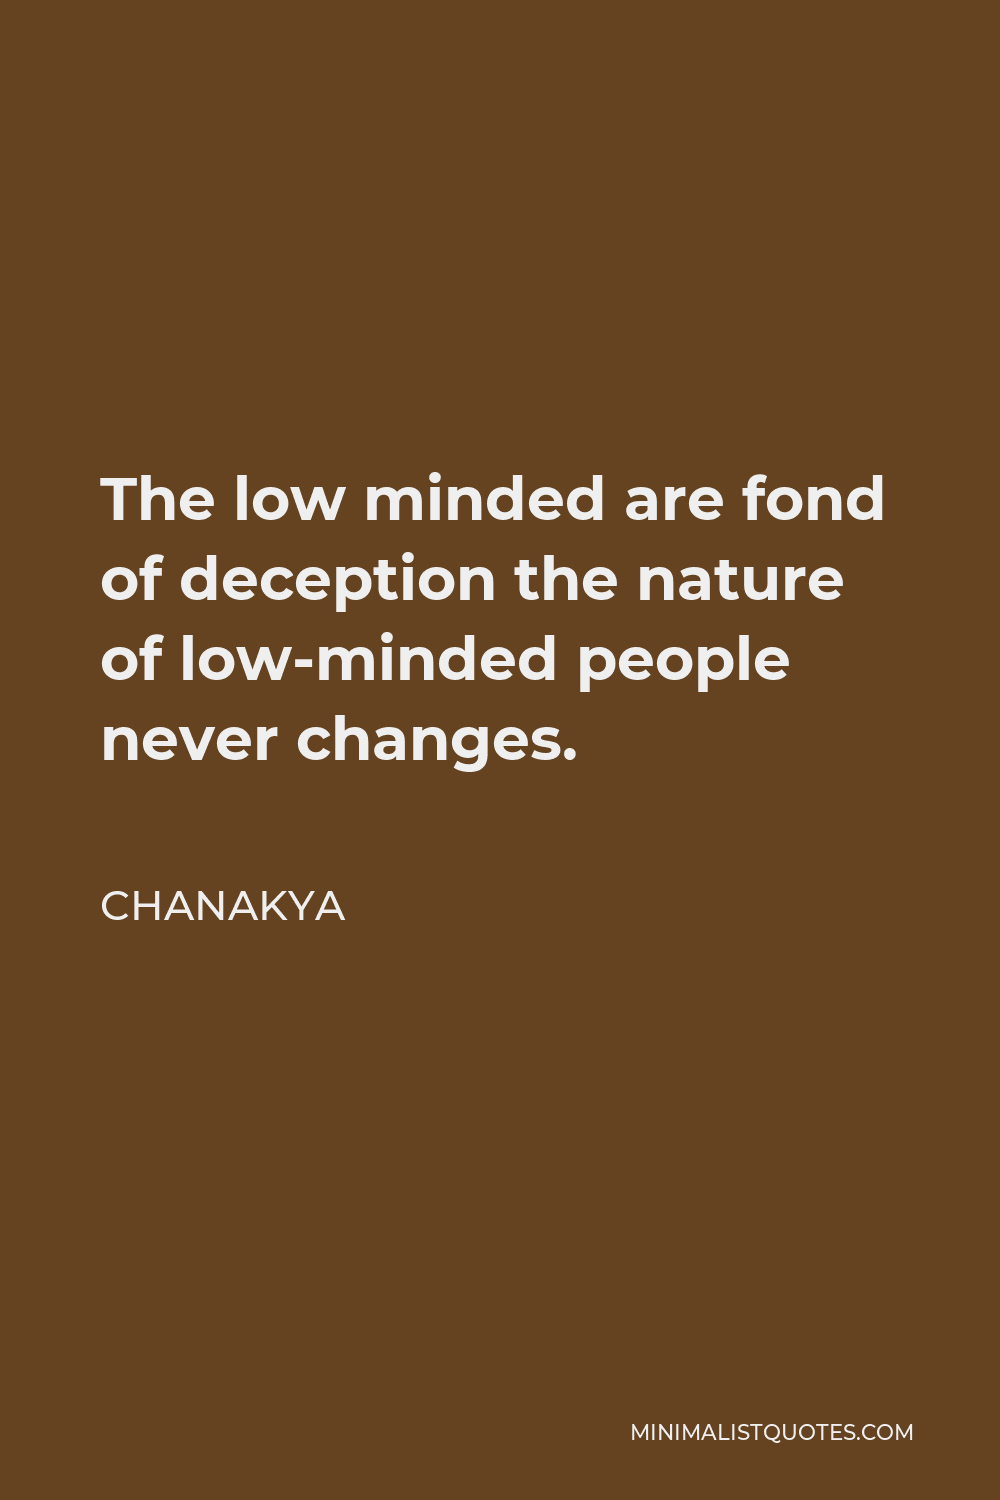 Chanakya Quote - The low minded are fond of deception the nature of low-minded people never changes.